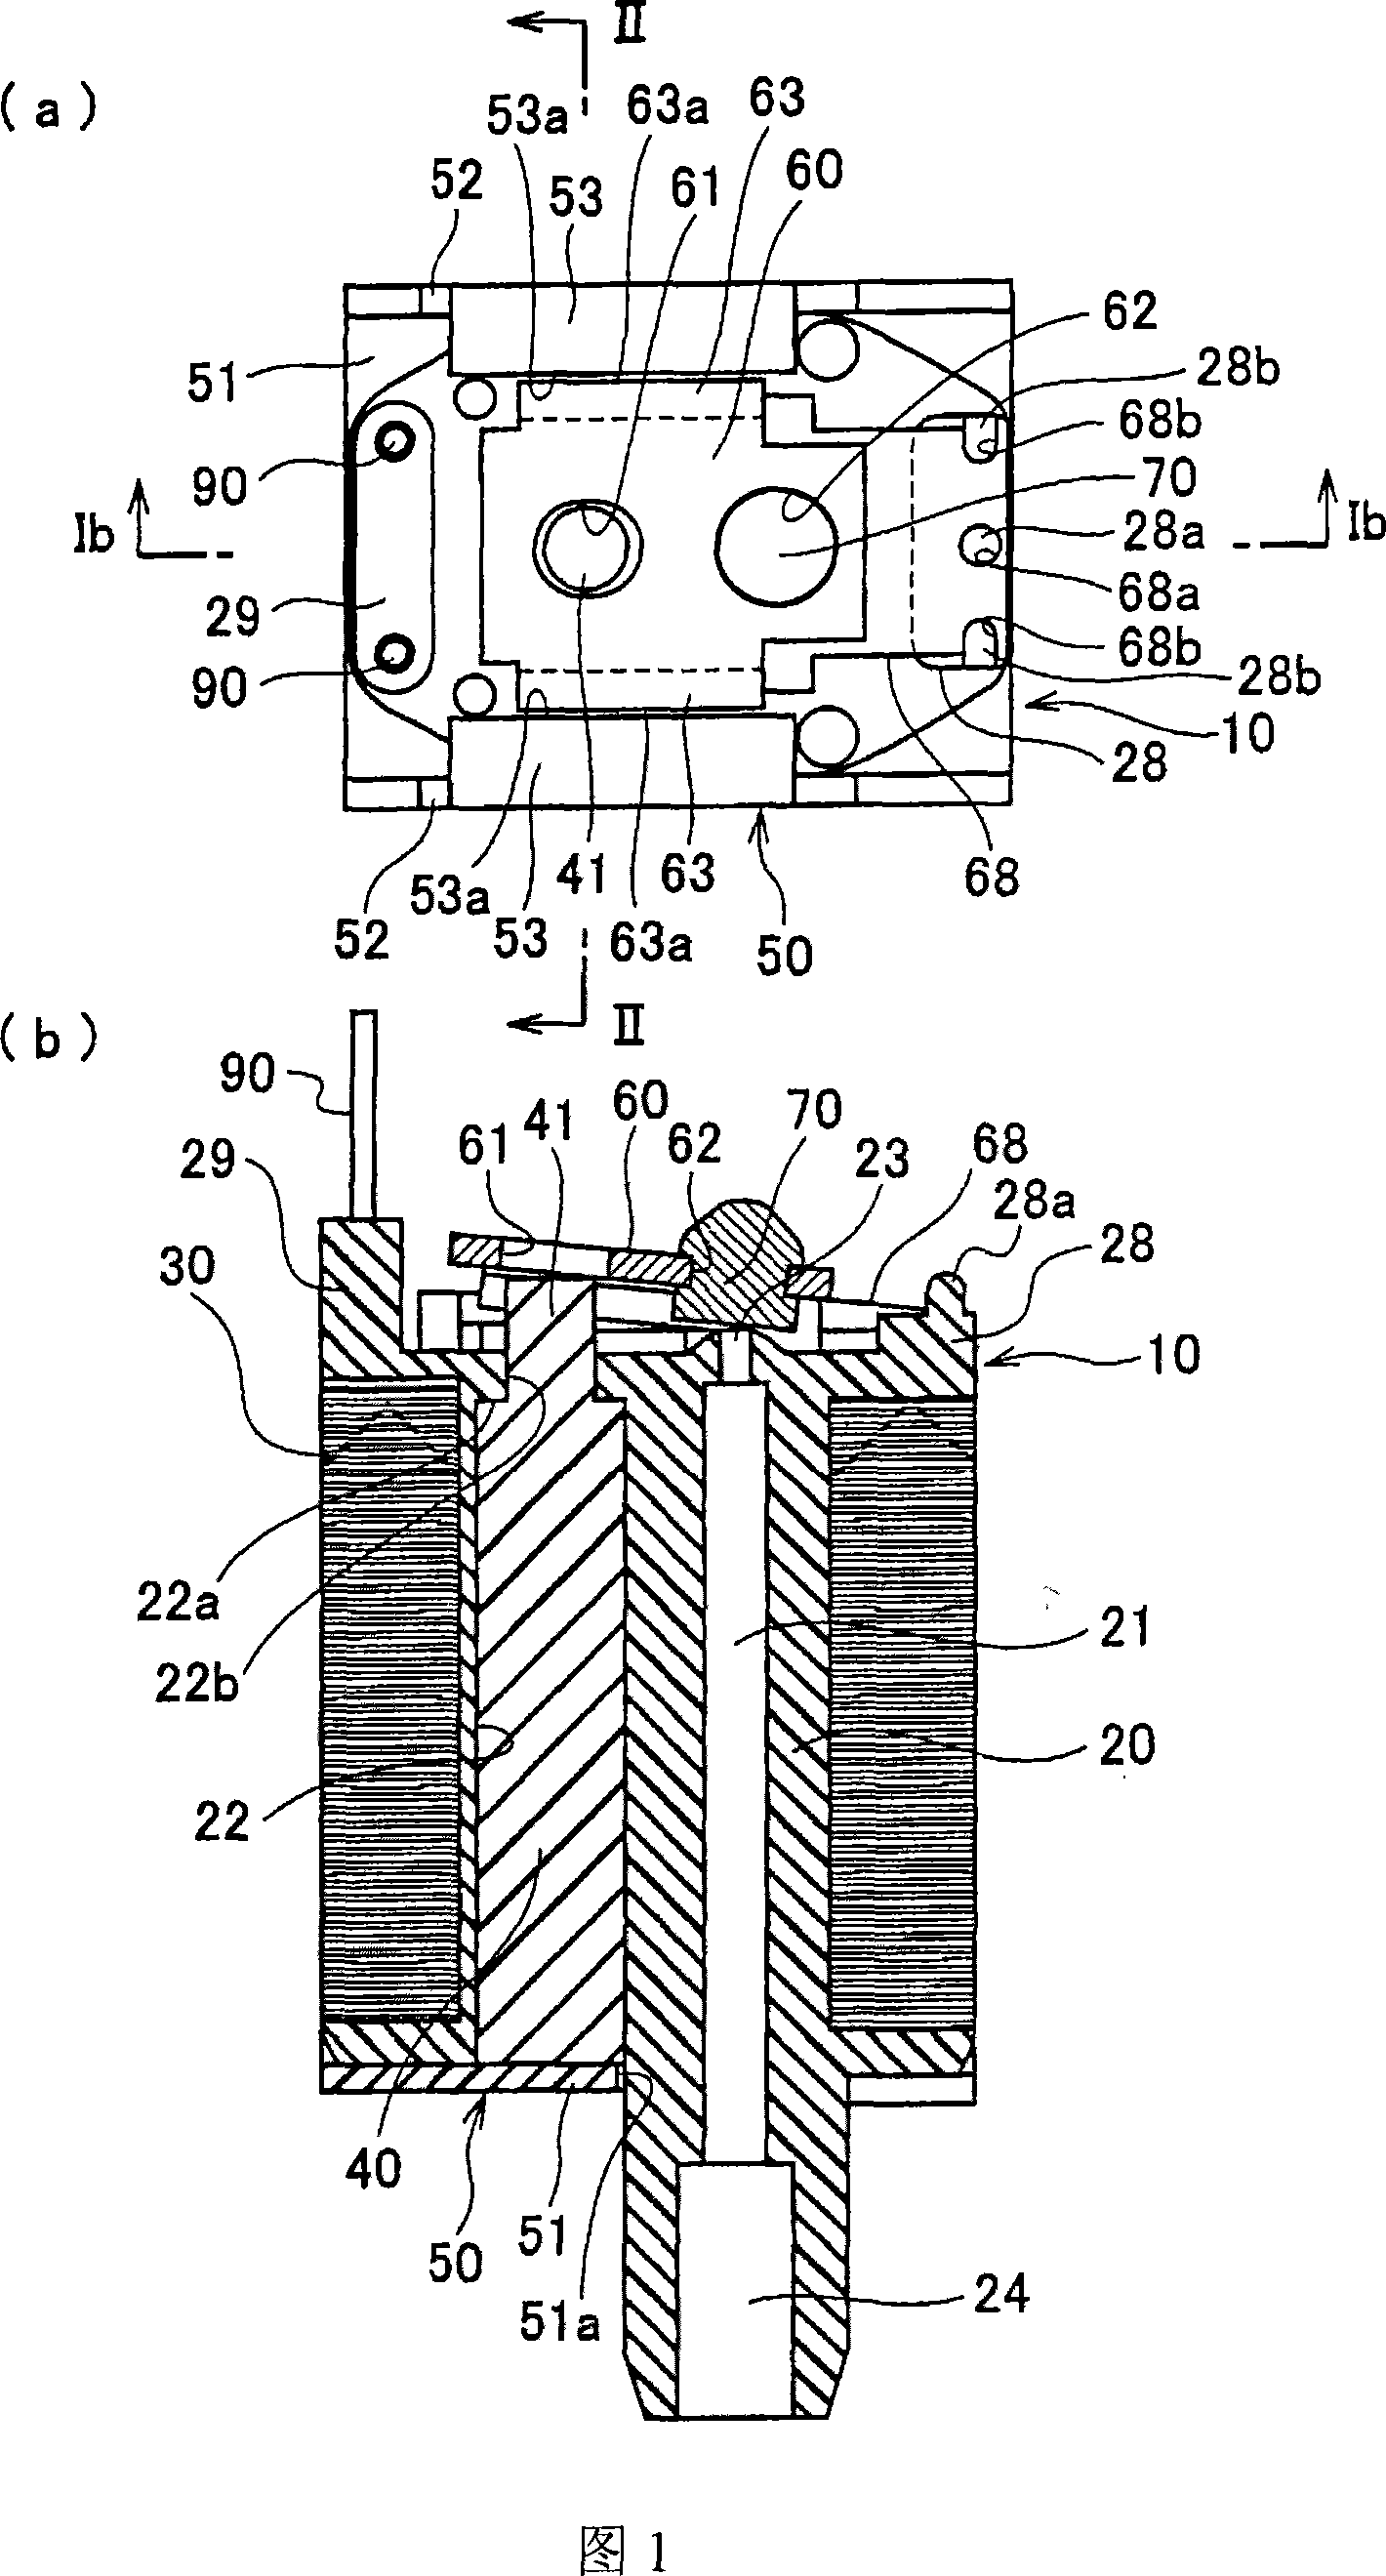 Electric-powered air release valve and blood pressure gauge